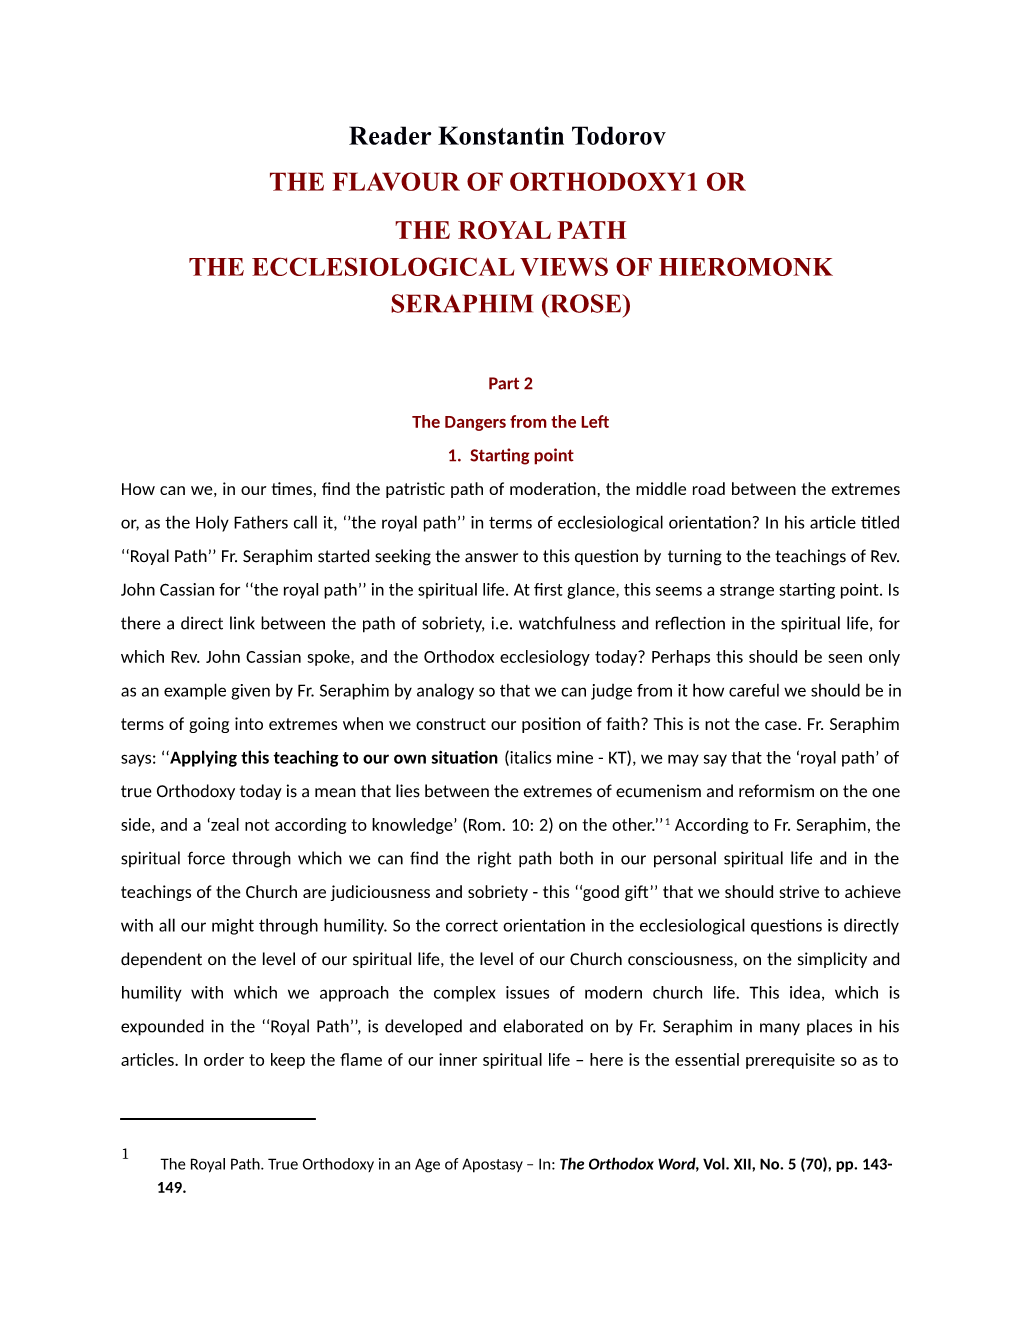 Reader Konstantin Todorov the FLAVOUR of ORTHODOXY1 OR the ROYAL PATH the ECCLESIOLOGICAL VIEWS of HIEROMONK SERAPHIM (ROSE)